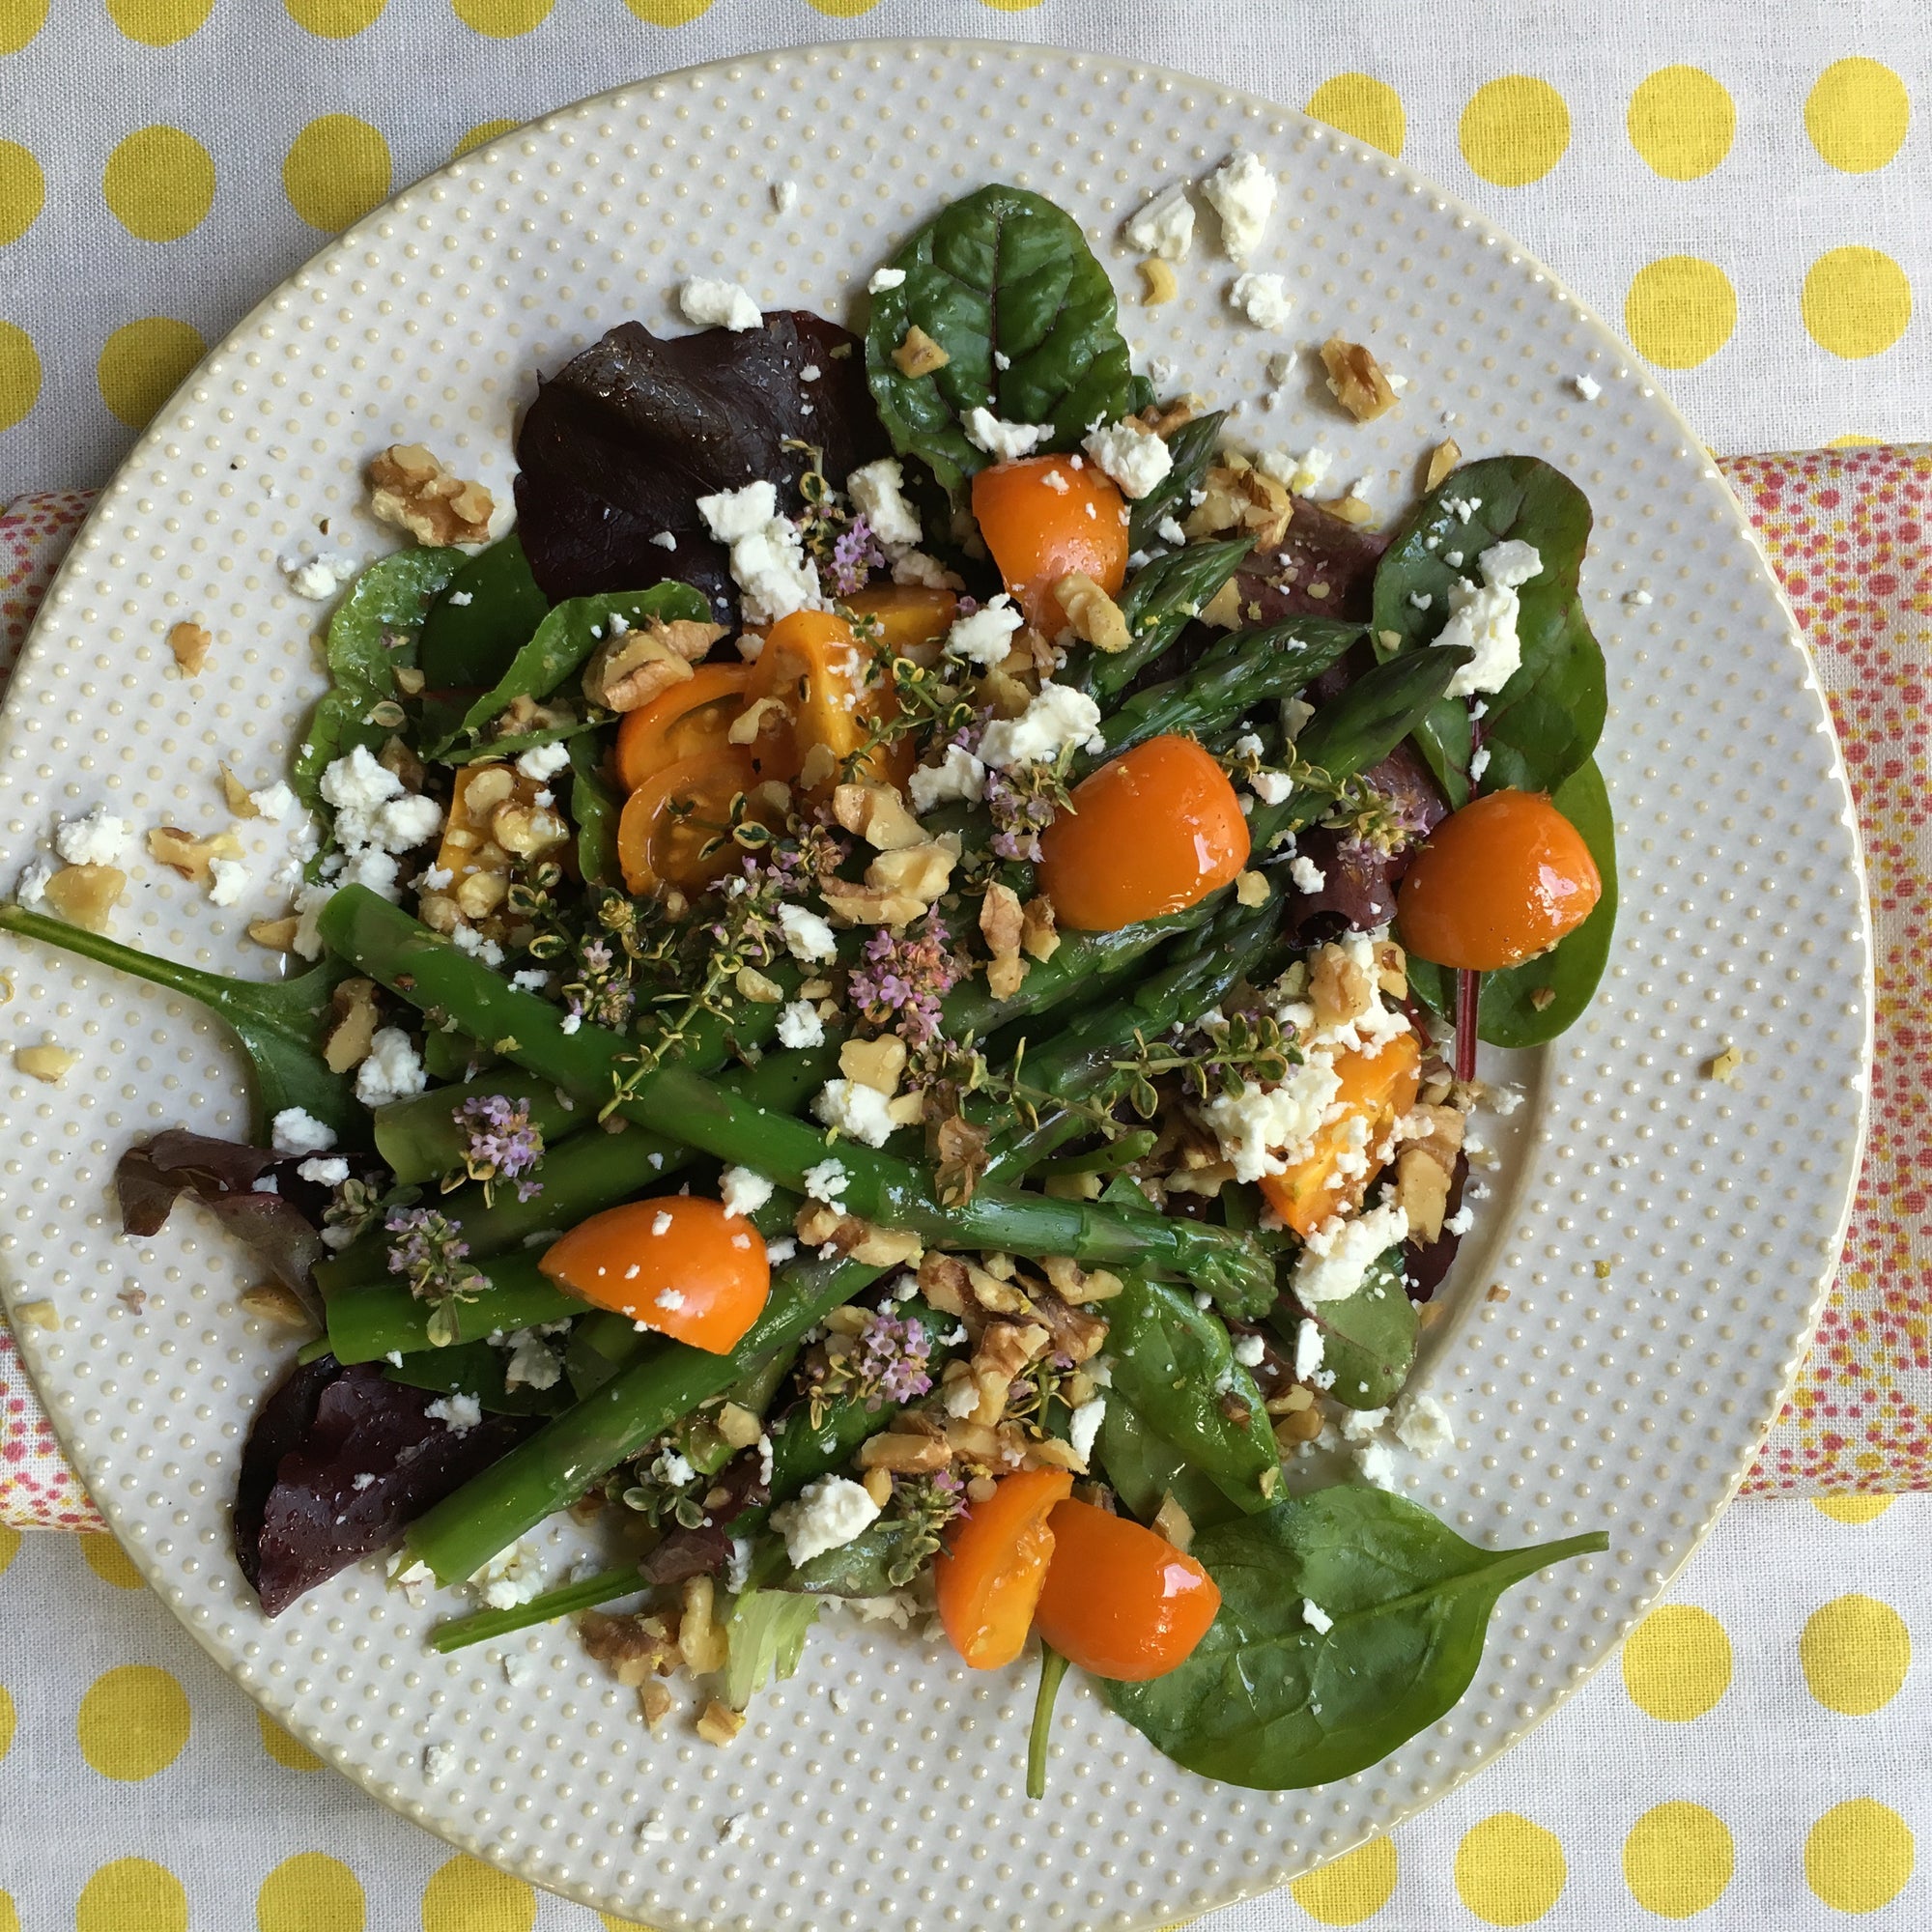 ASPARAGUS AND LEMON THYME SALAD WITH WALNUTS AND FETA